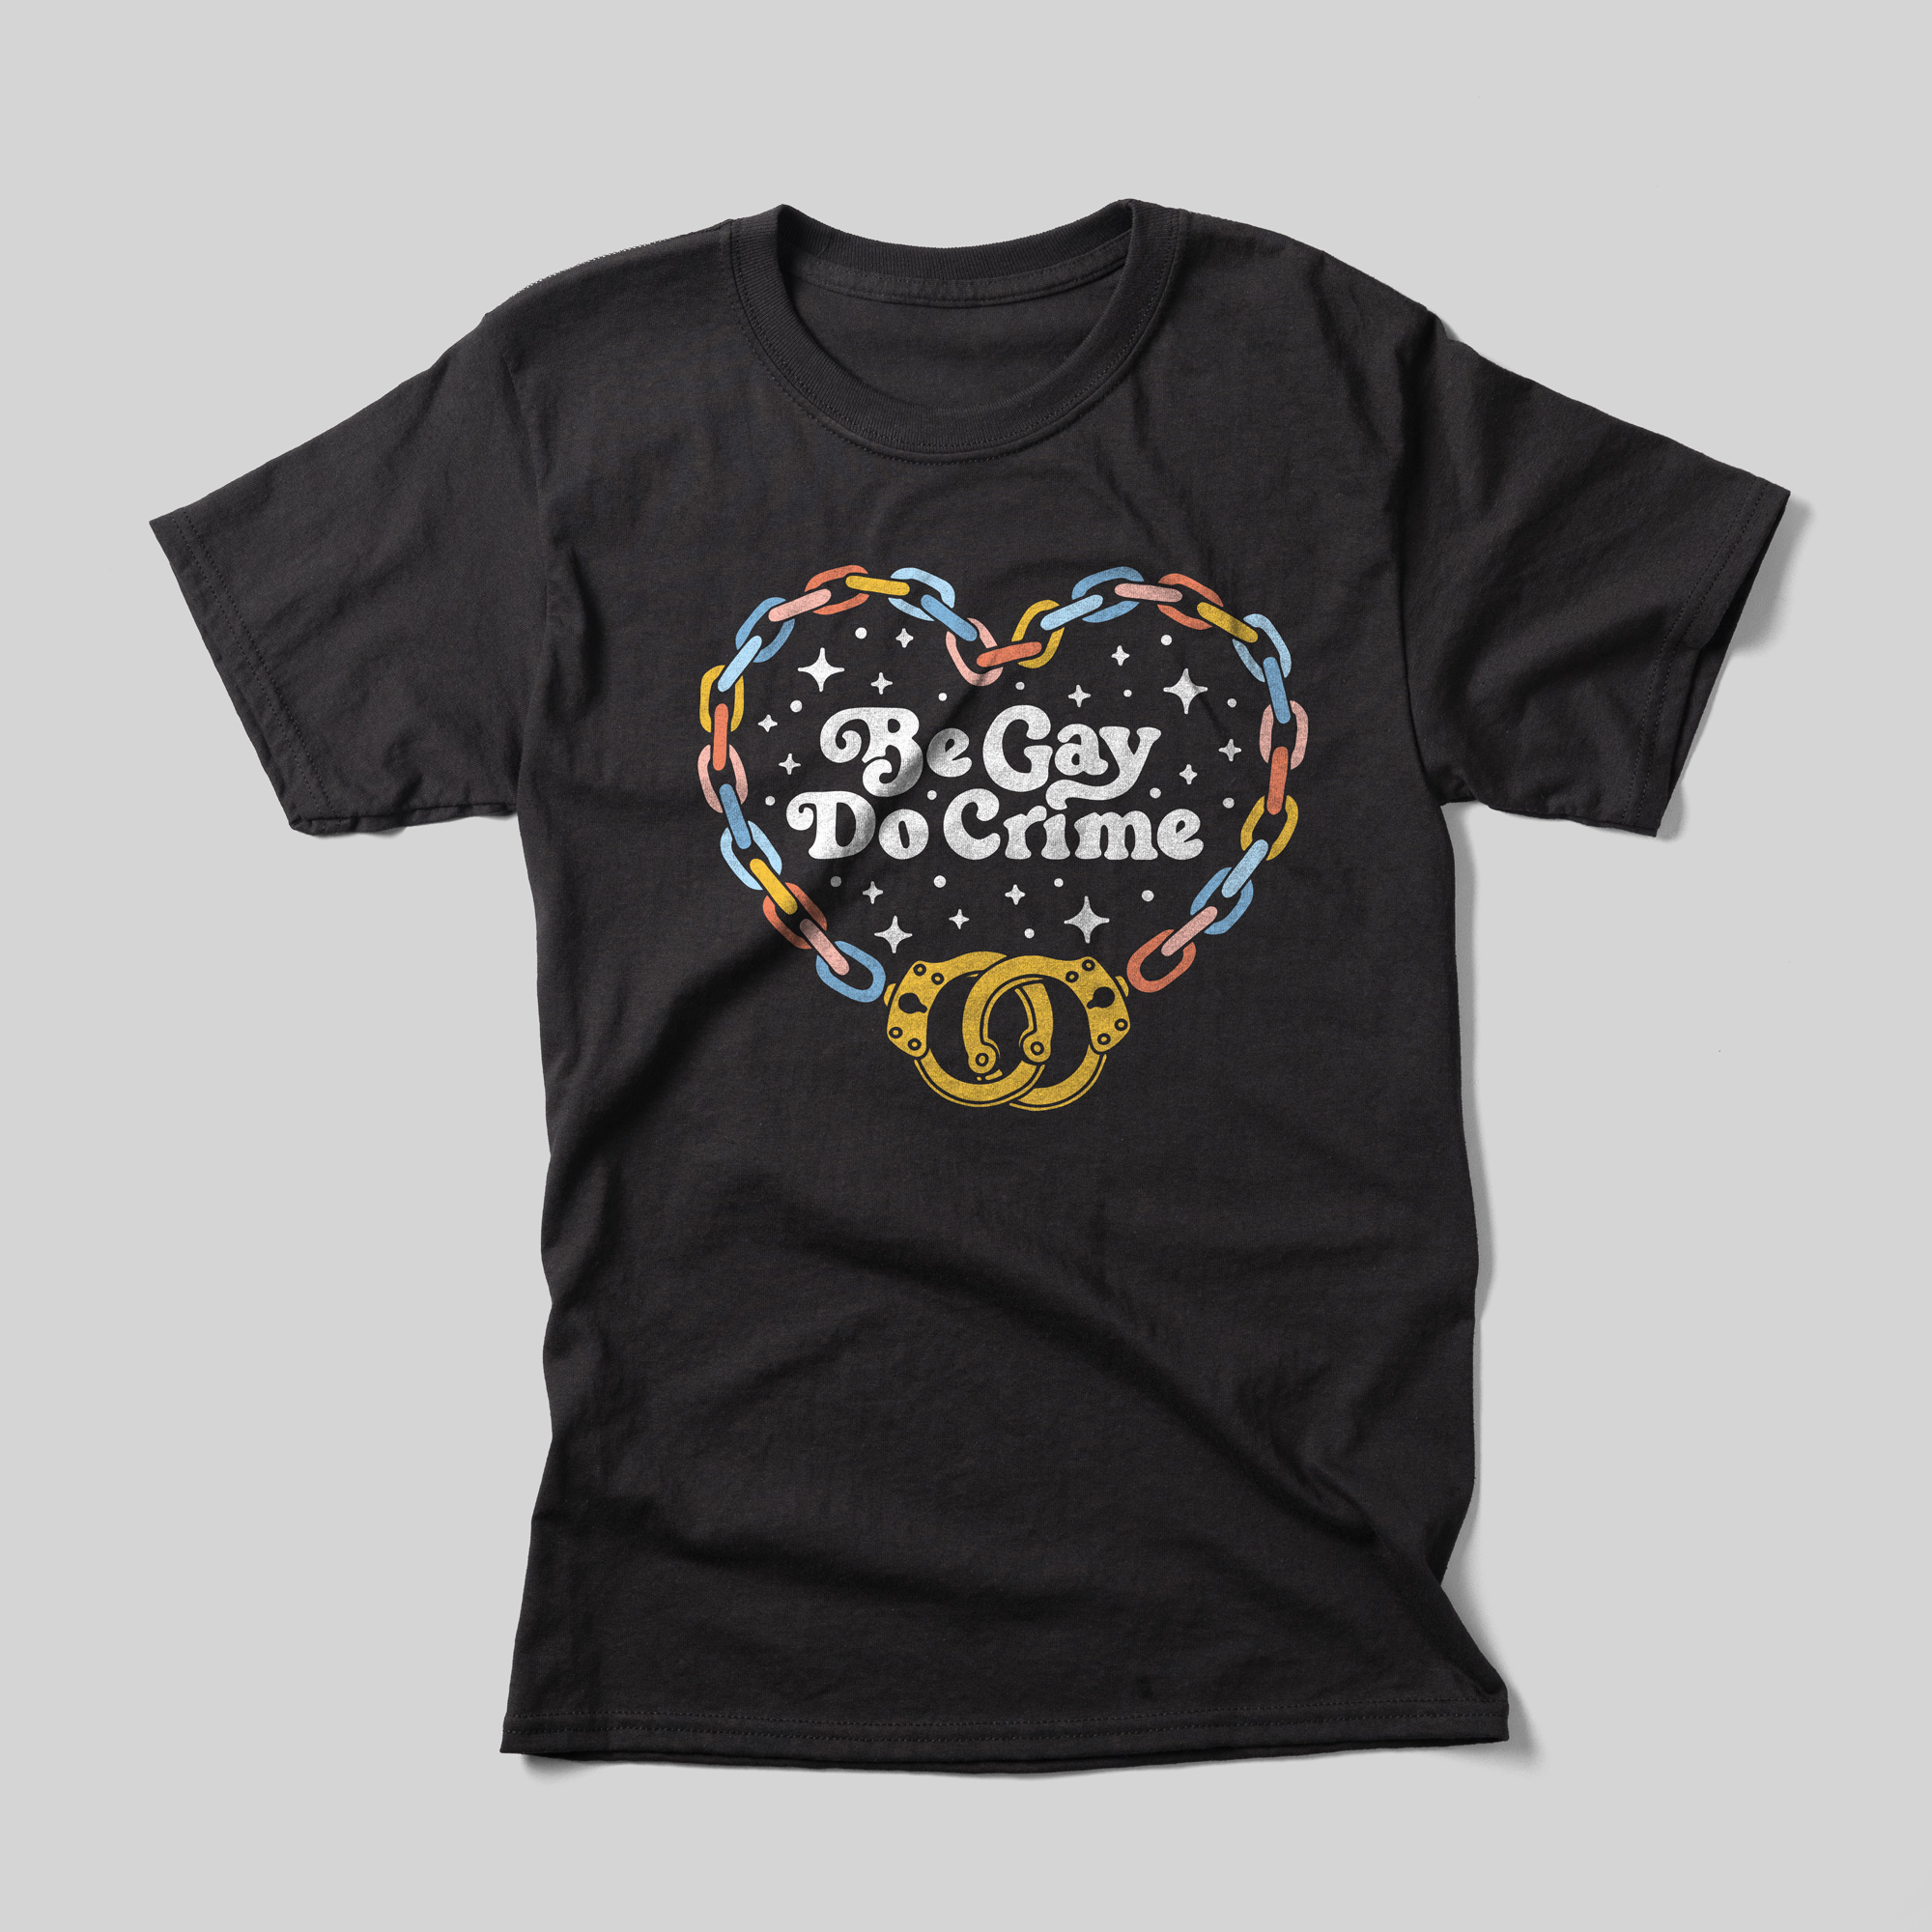 A black t-shirt that reads Be Gay Do Crime inside of handcuffs in a heart shape and cuffed together at the point.